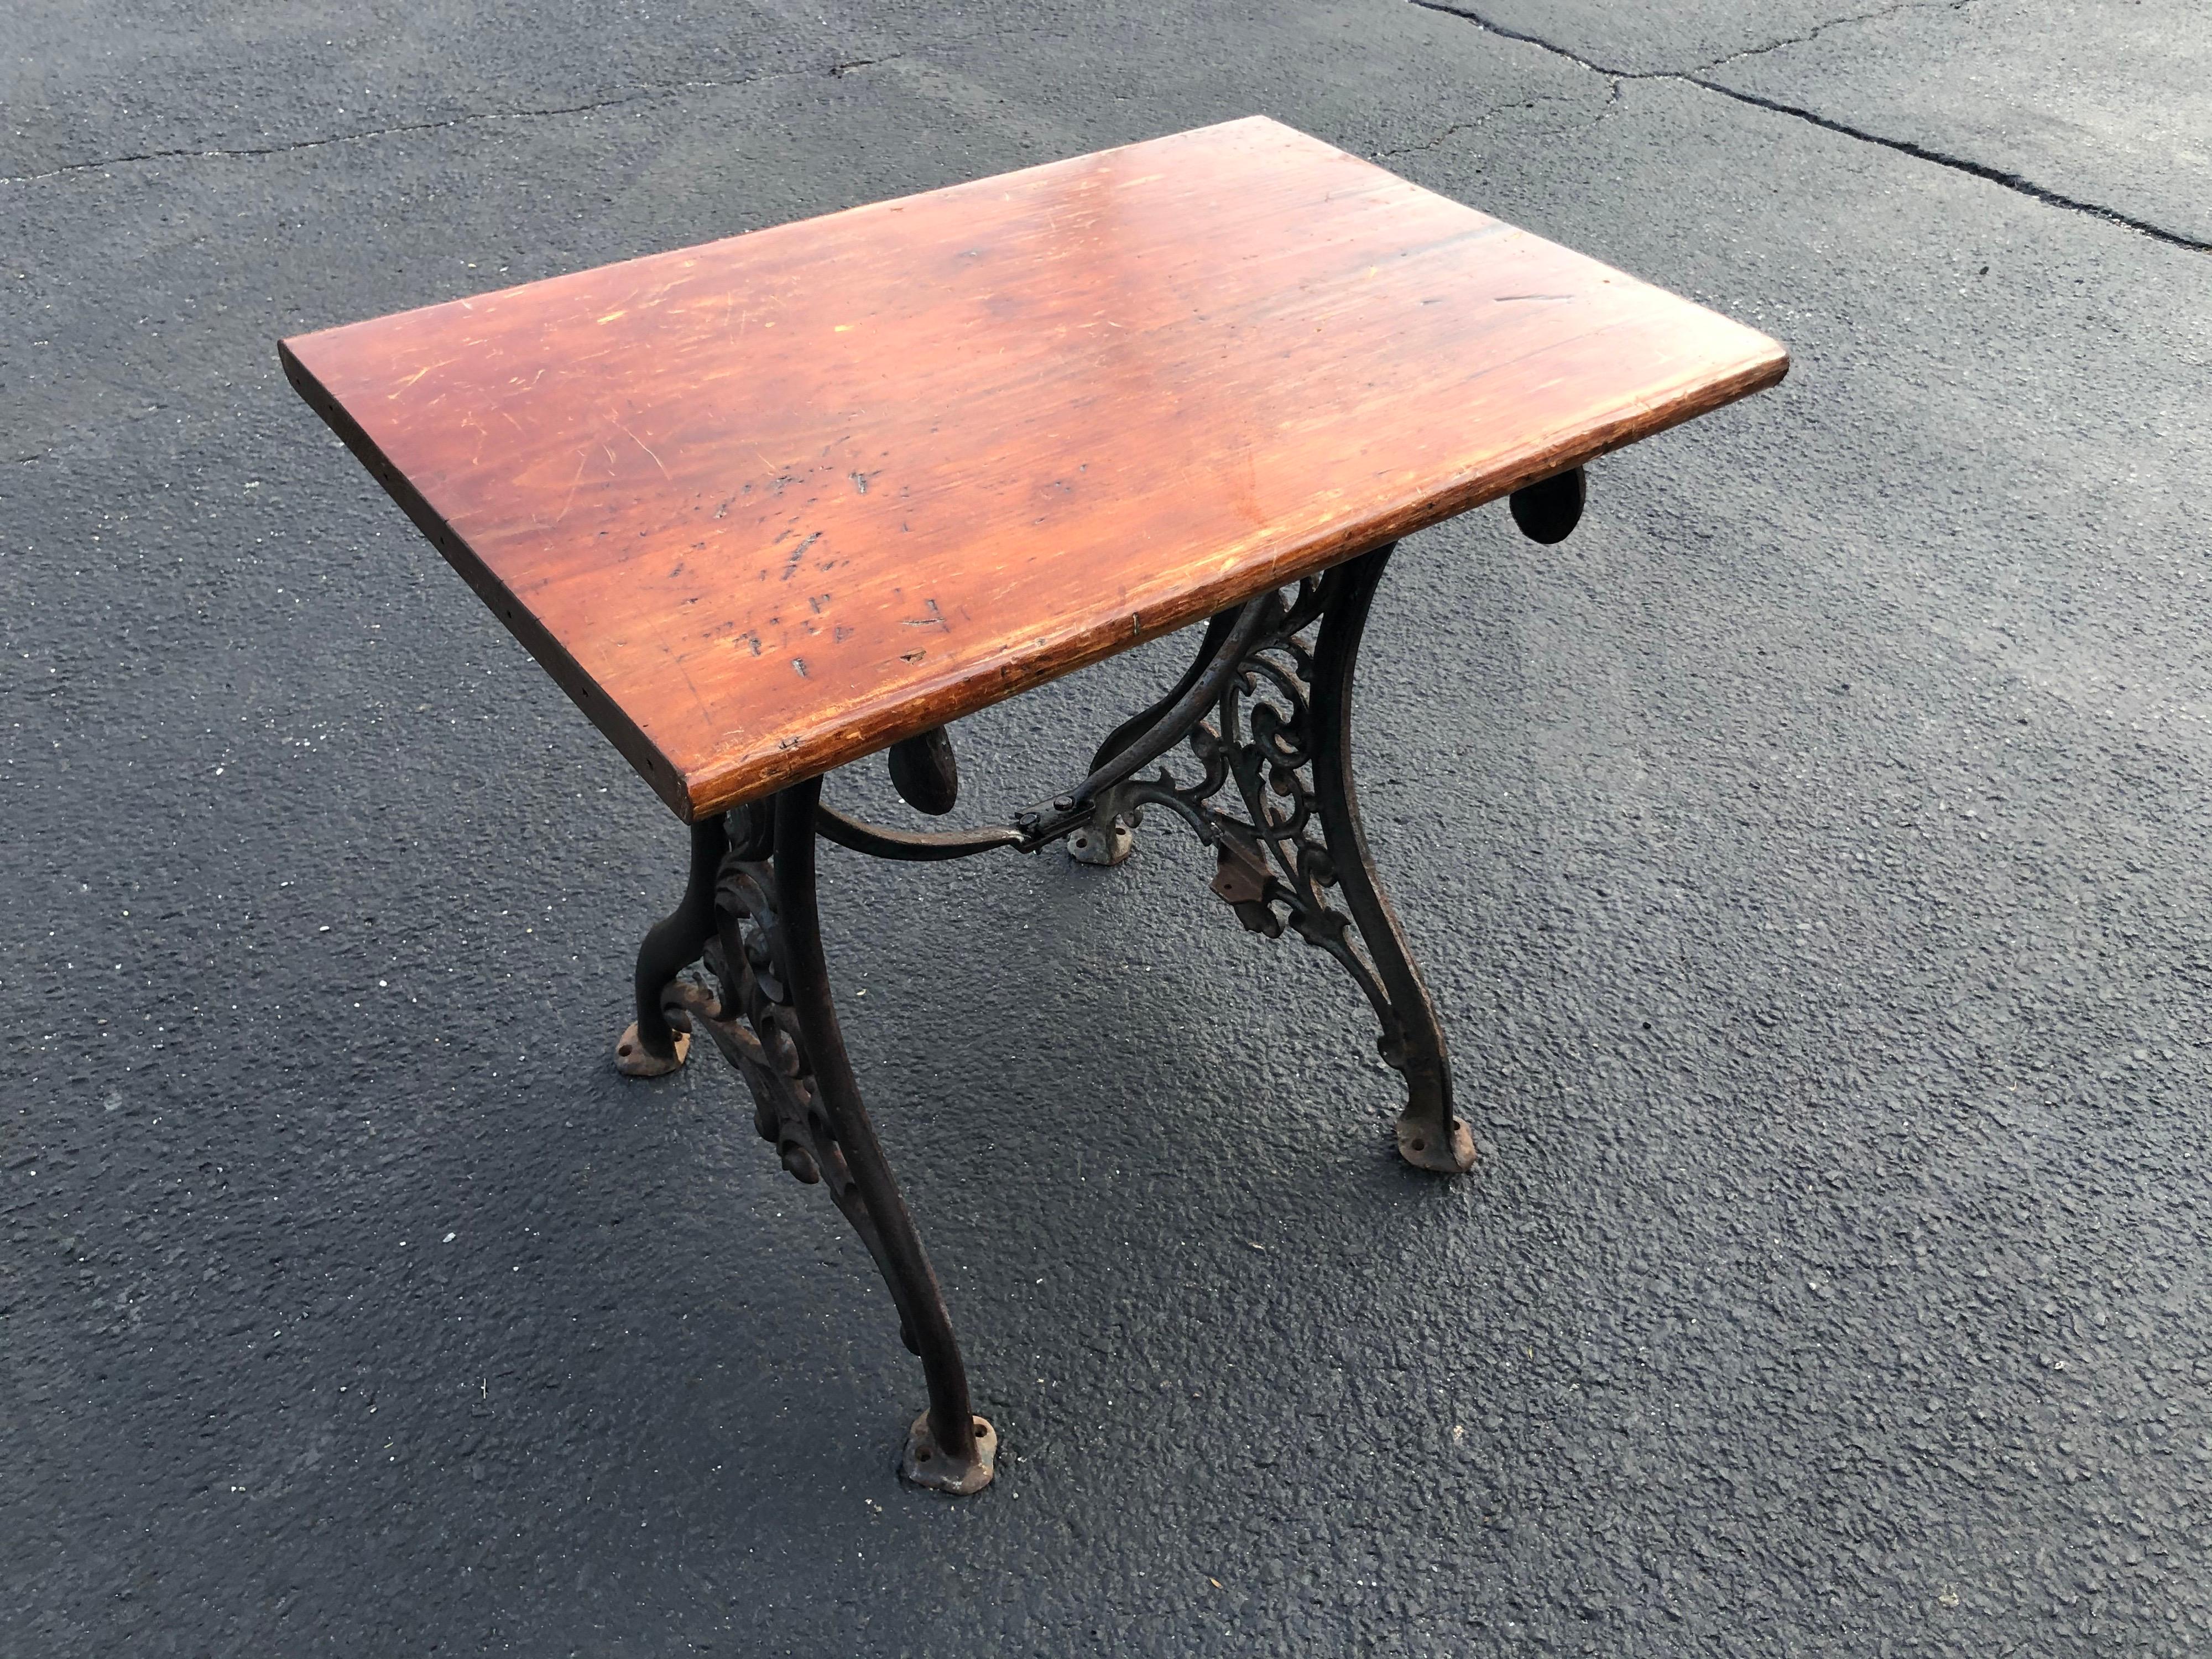 Victorian school desk or sewing table. Classic embellished iron sides make up this beauty. With a rustic distressed pinewood top and holes in the iron feet to be bolted into the ground. Typical for early school classroom desks or for sewing